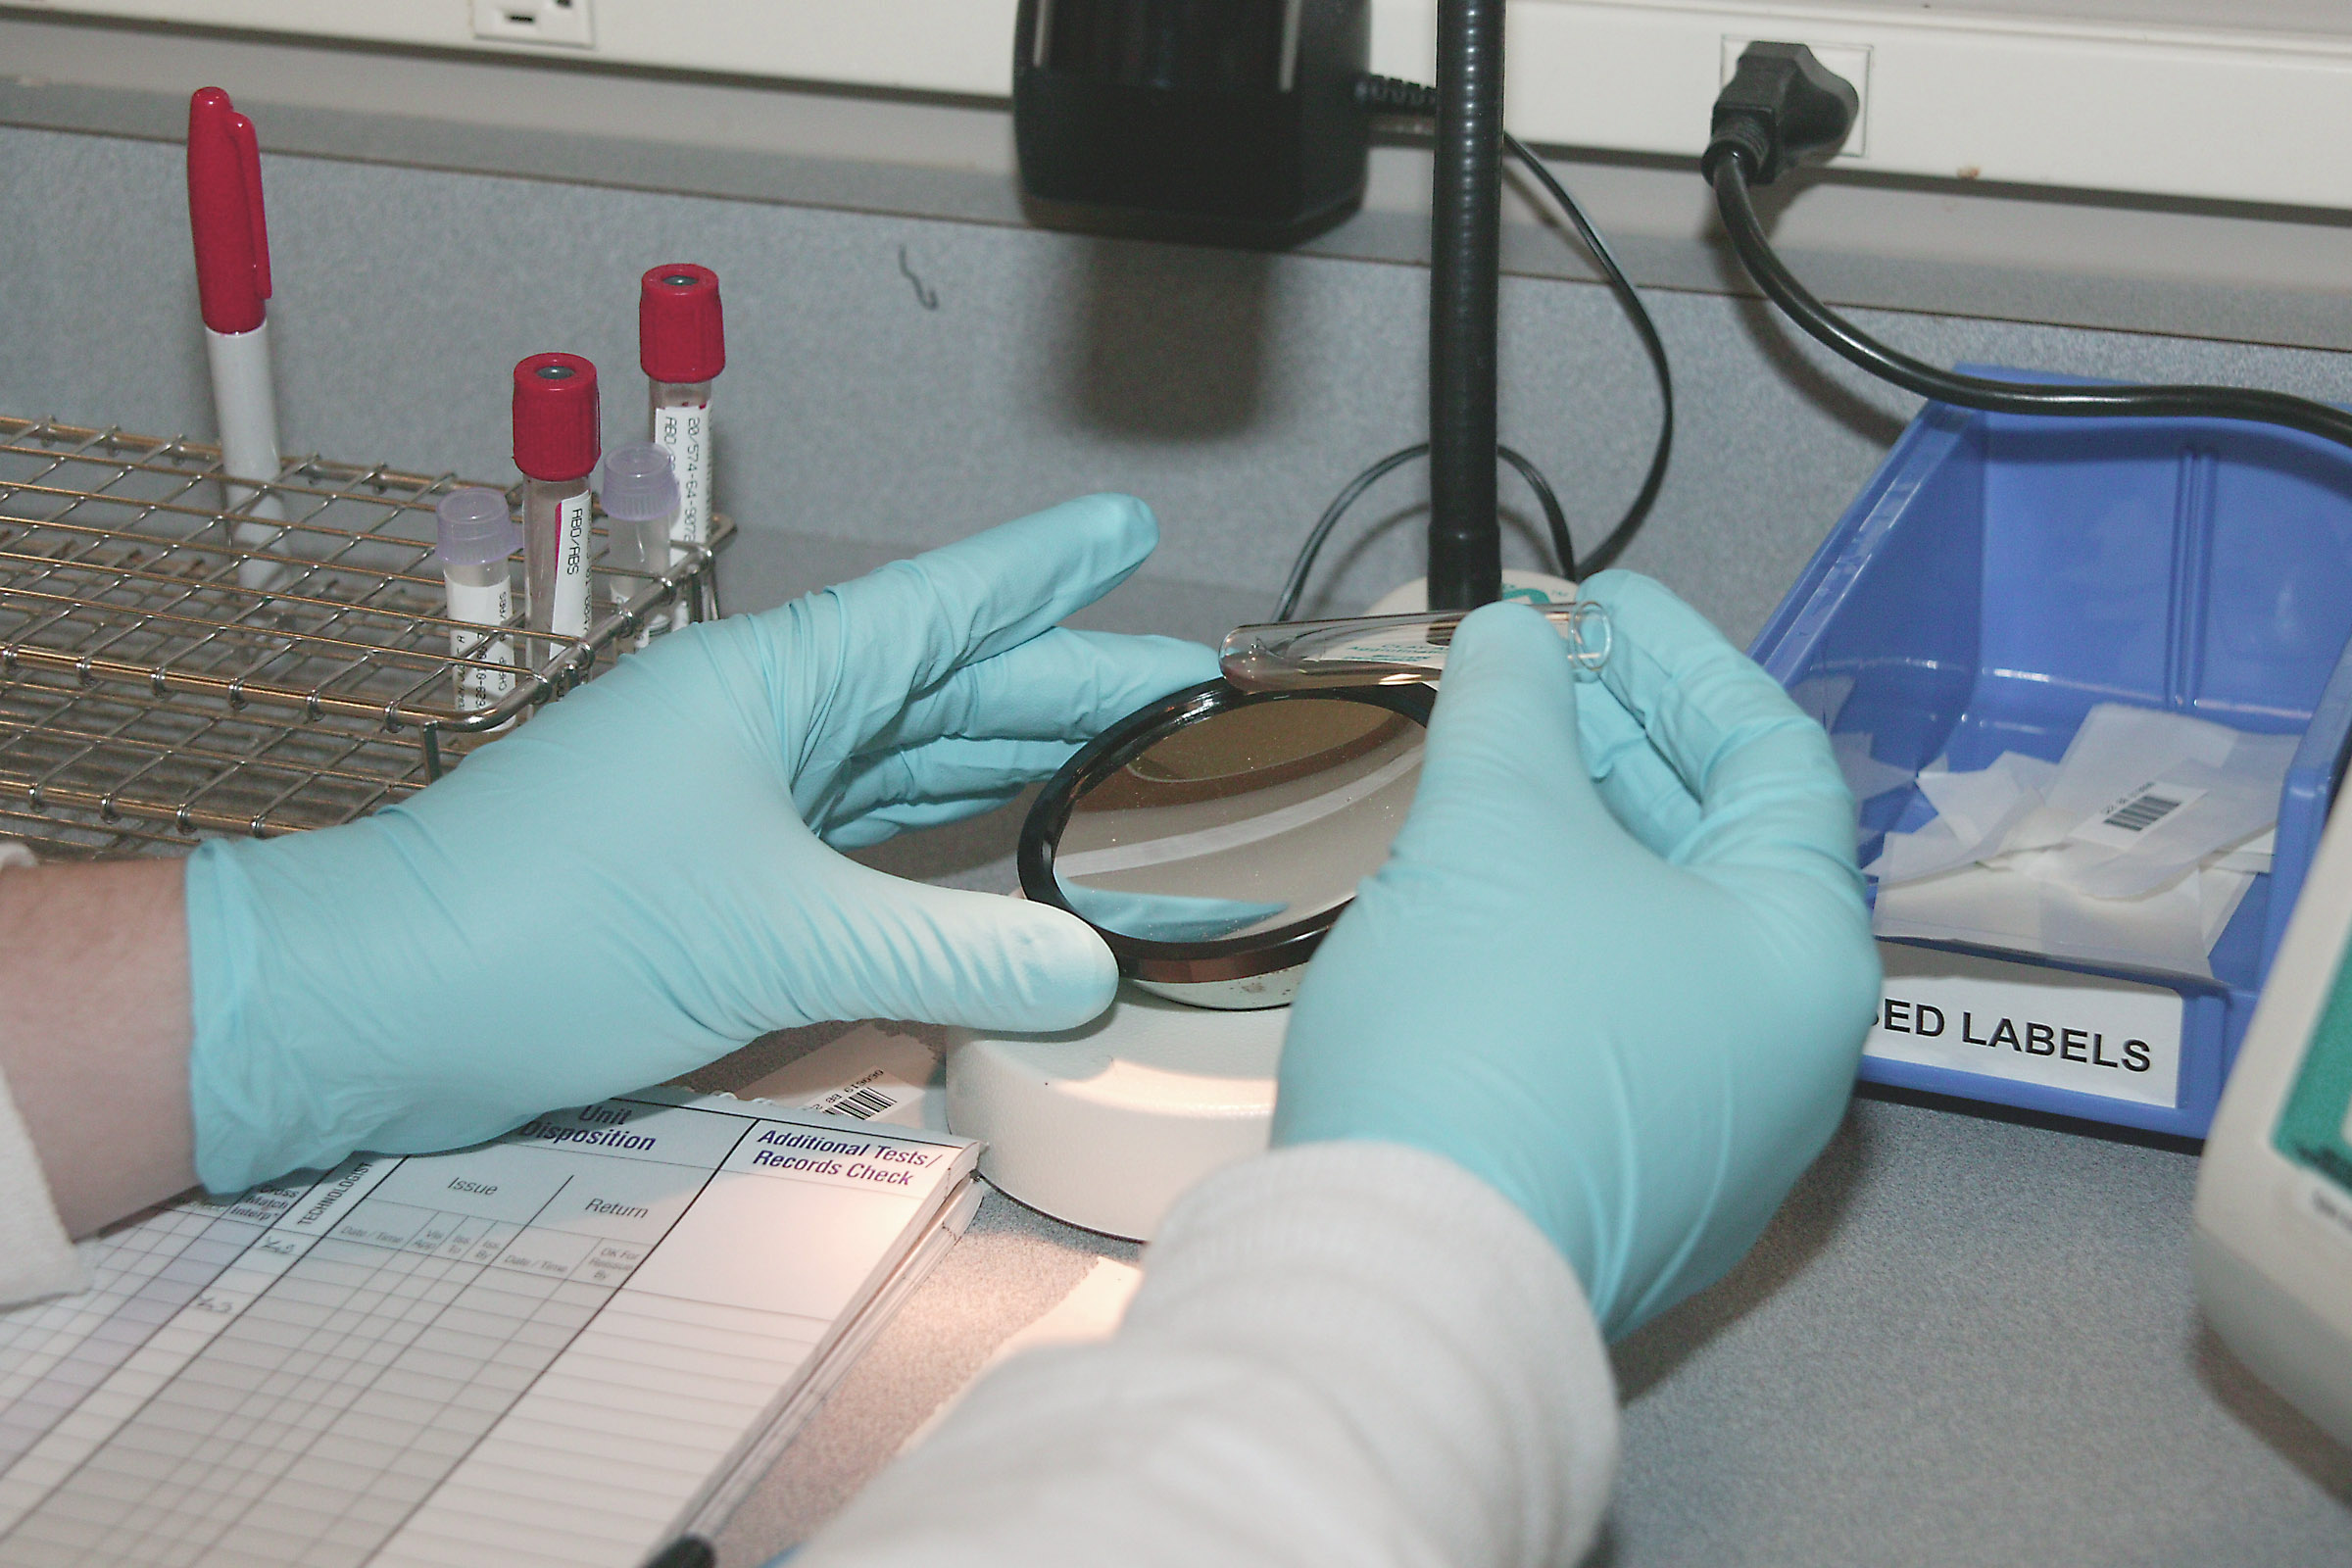 Shaw's clinical laboratory tests more than blood